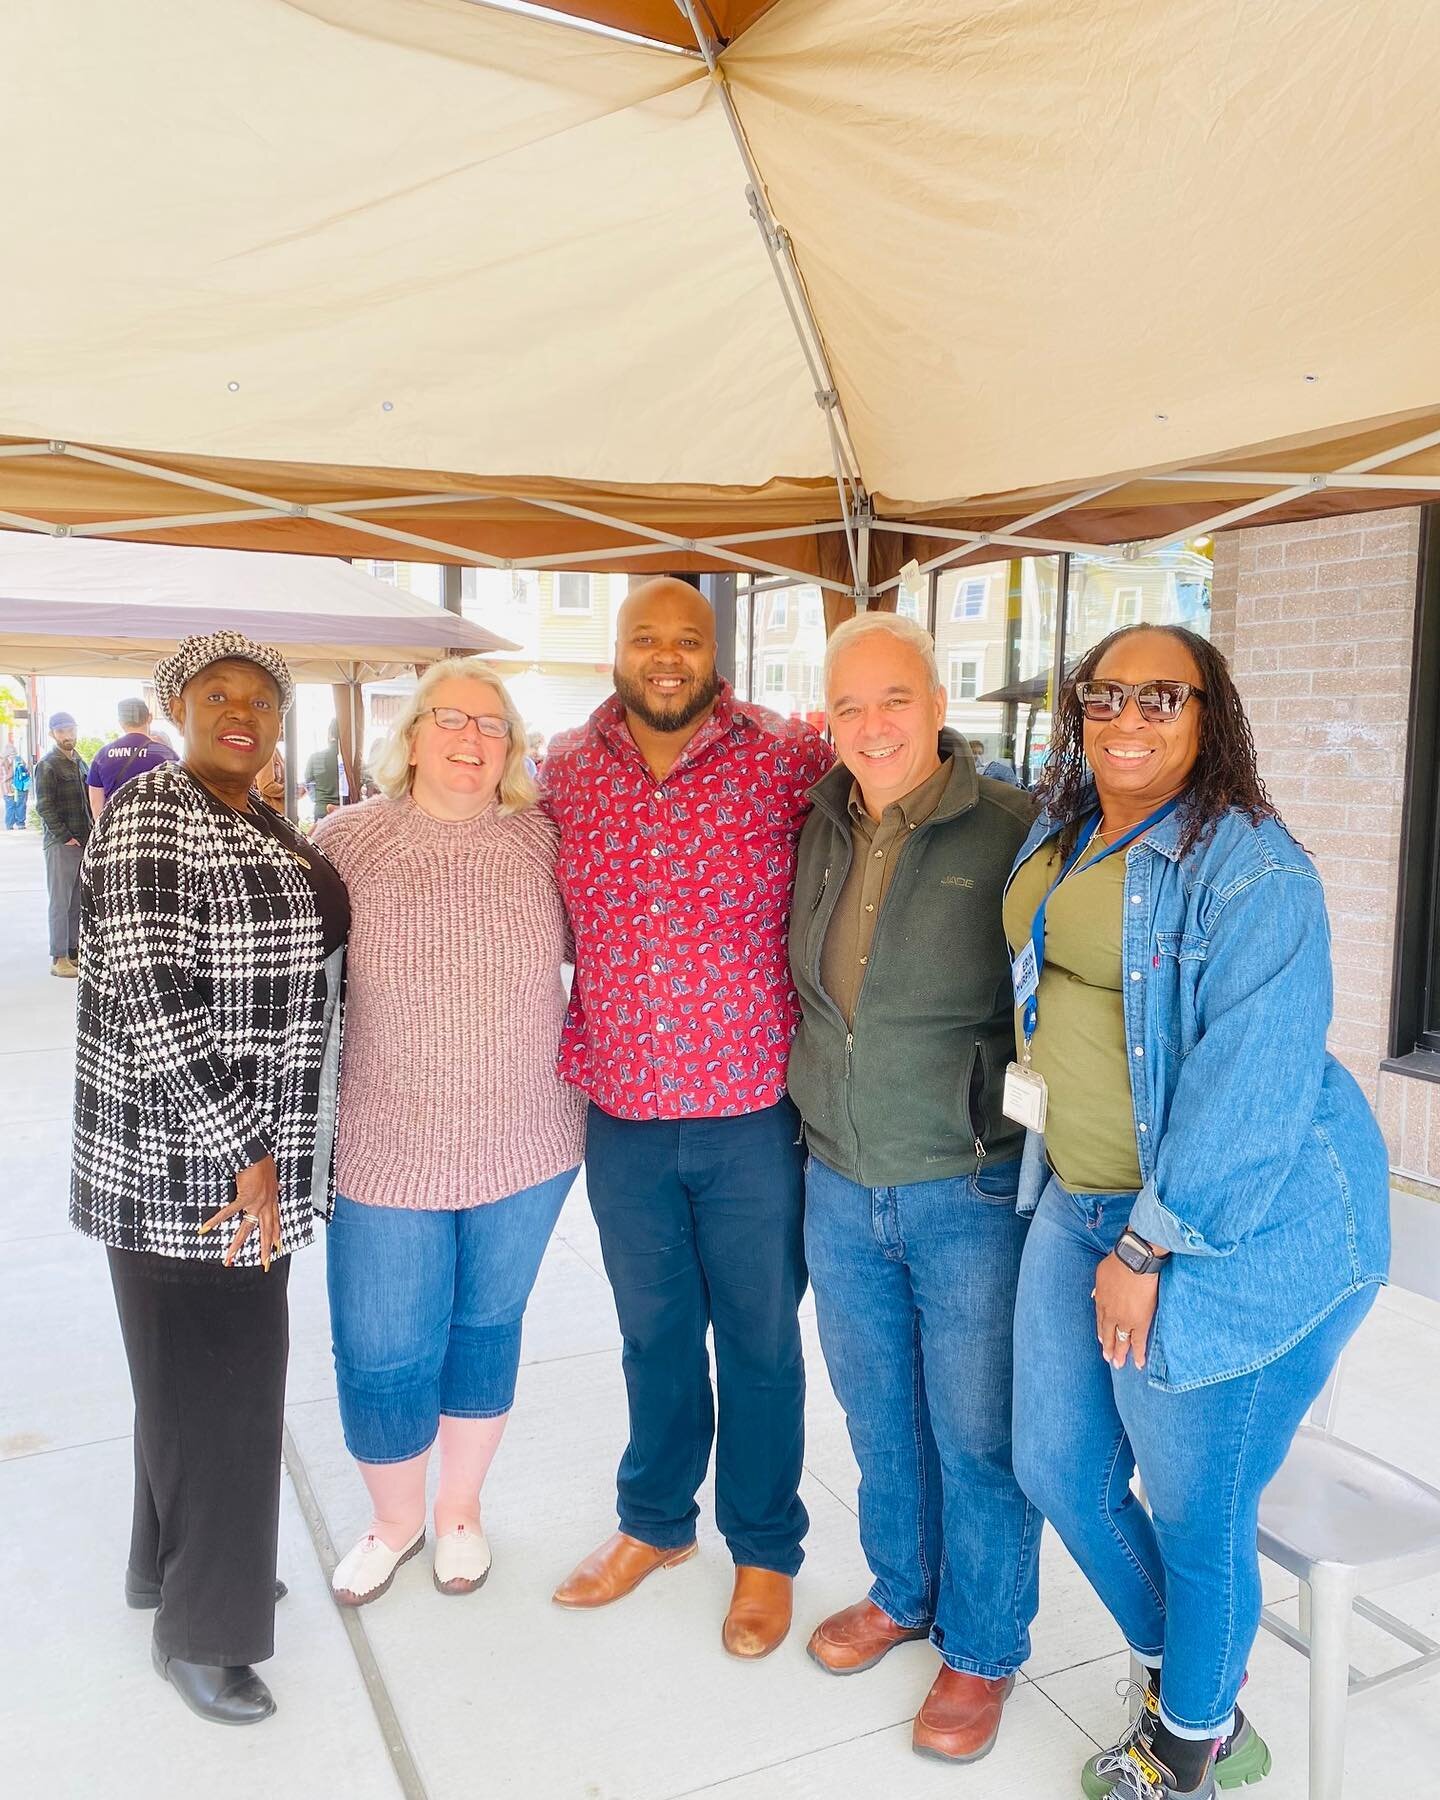 Celebrating New Bowdoin Business- Bringing out the best on Bowdoin to the grand opening of the Dorchester Food Co͏-Op. Board members, business owners and City Council Staff.

Host: @dorchesterfood_coop 

#newbusiness #startup #dorchester #healthyfood